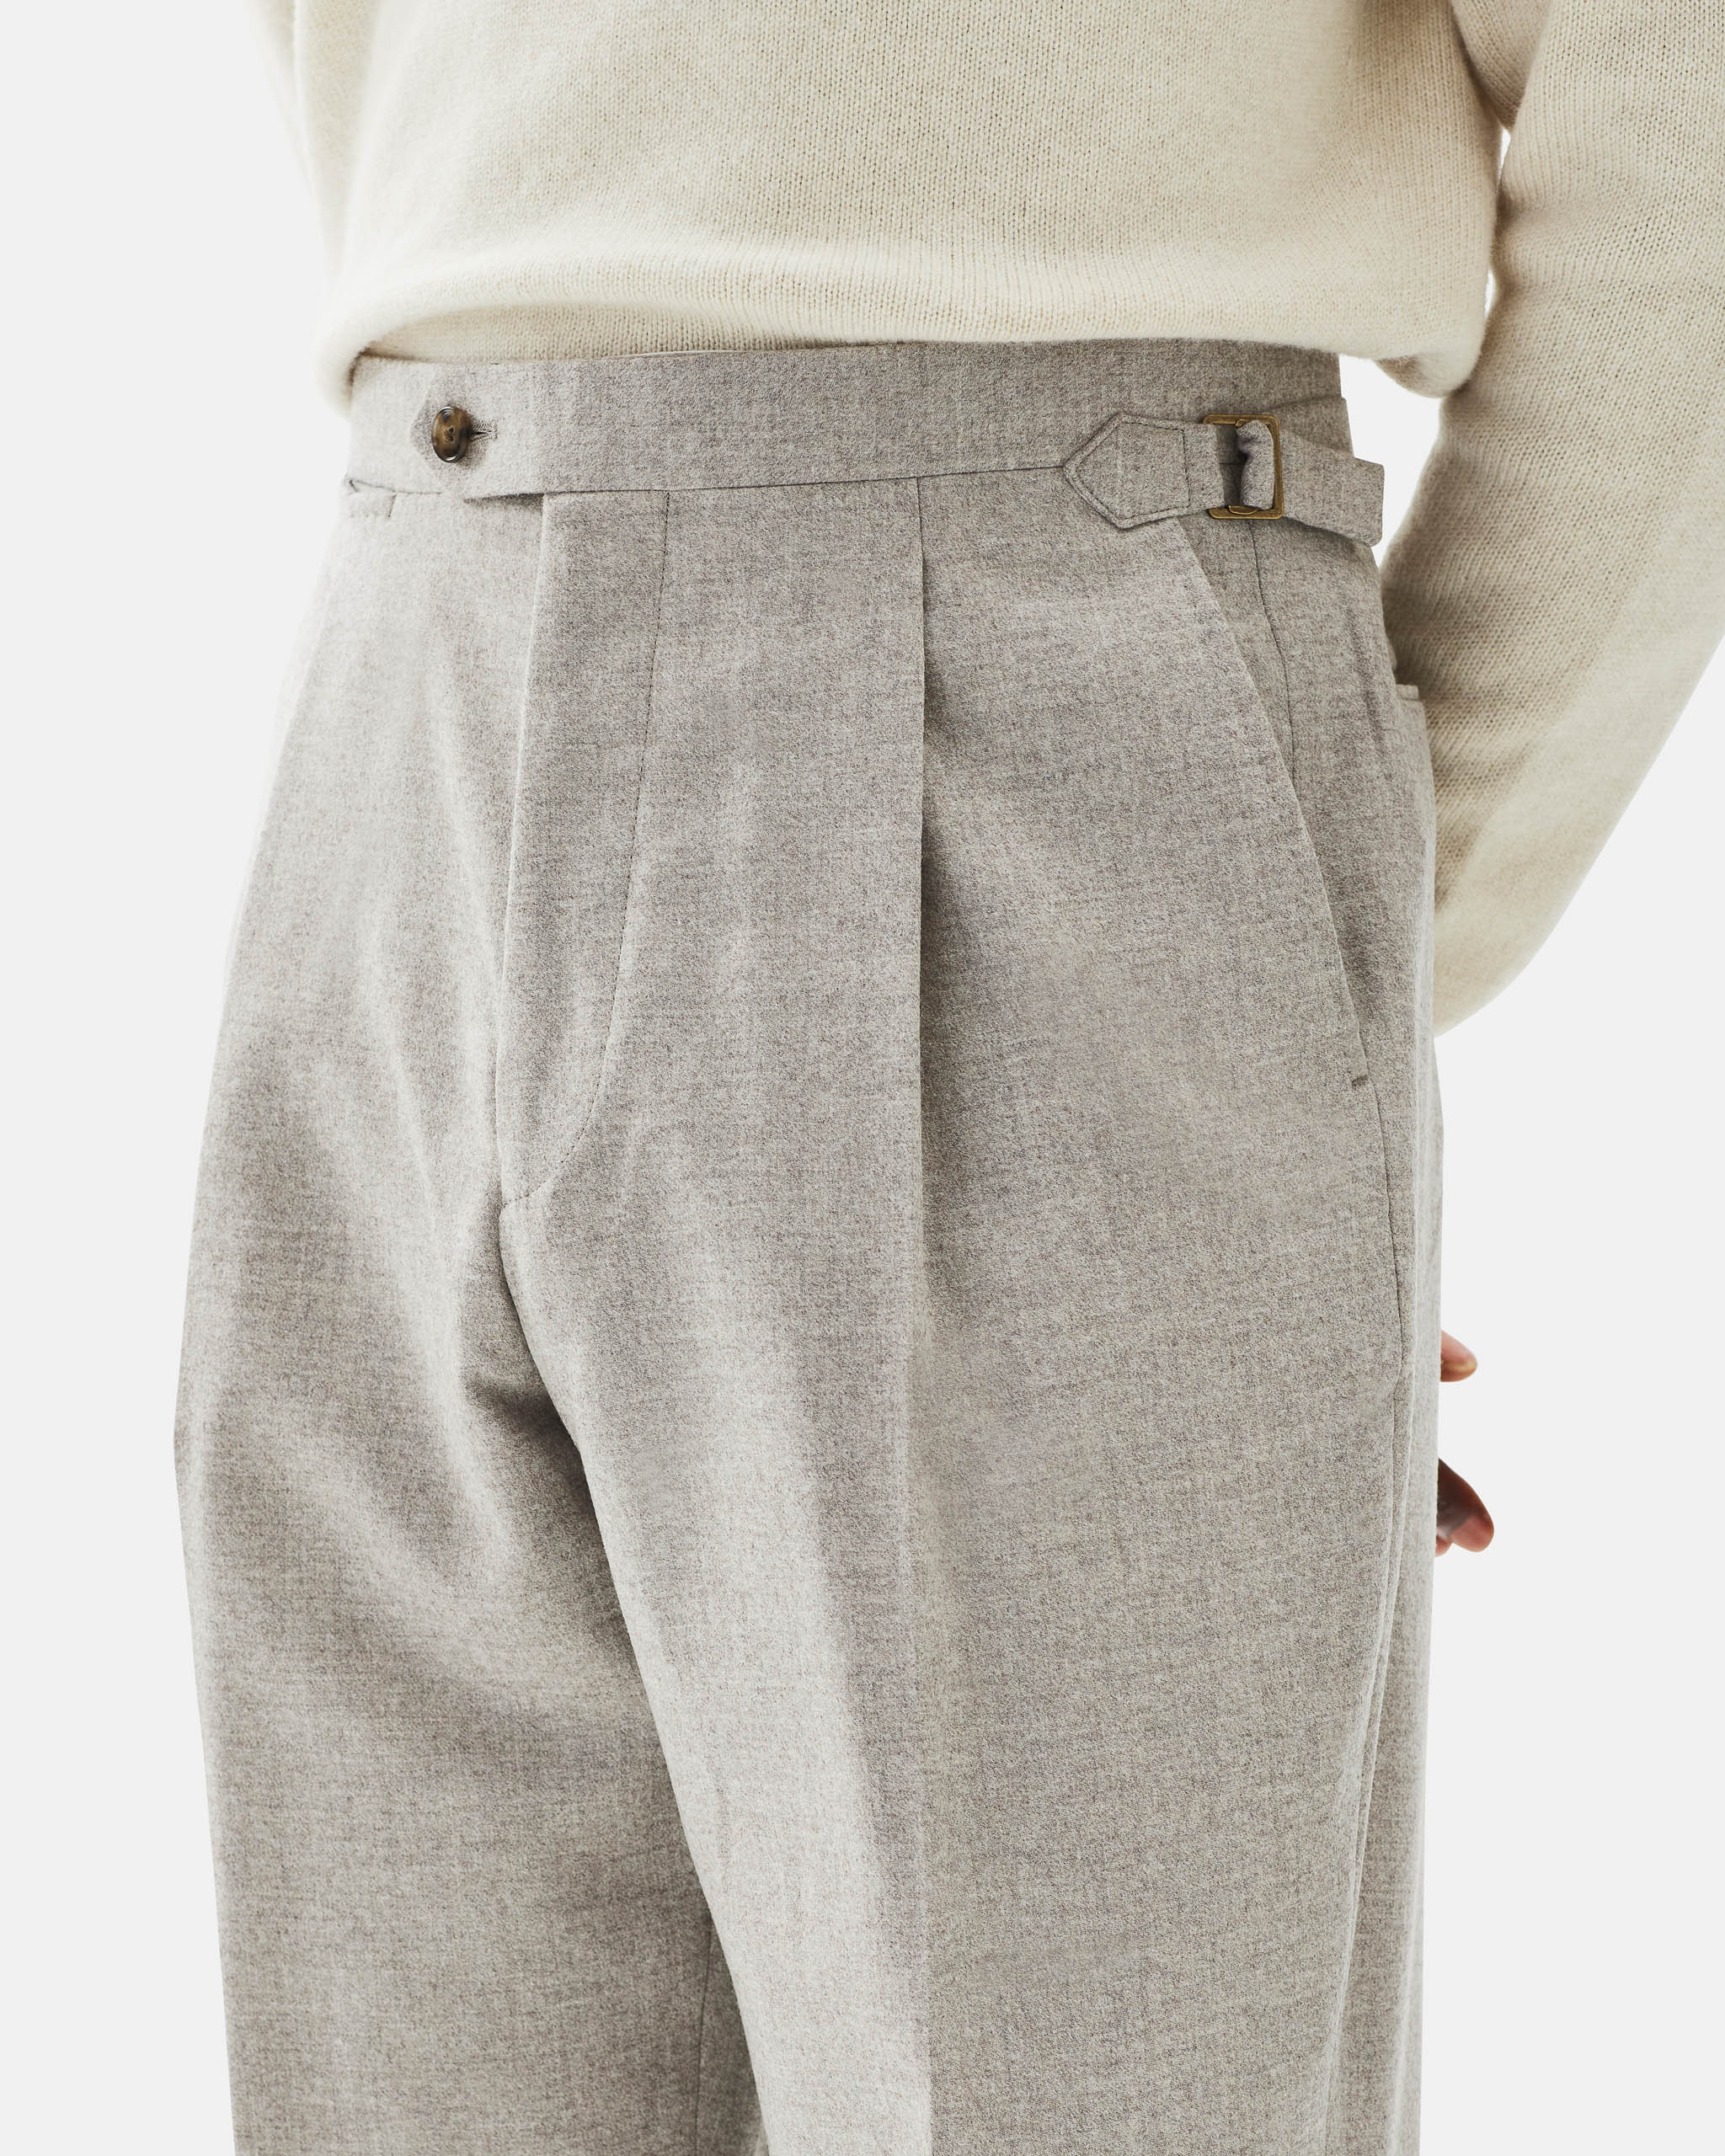 Trousers flannel wool & cashmere sand image 2